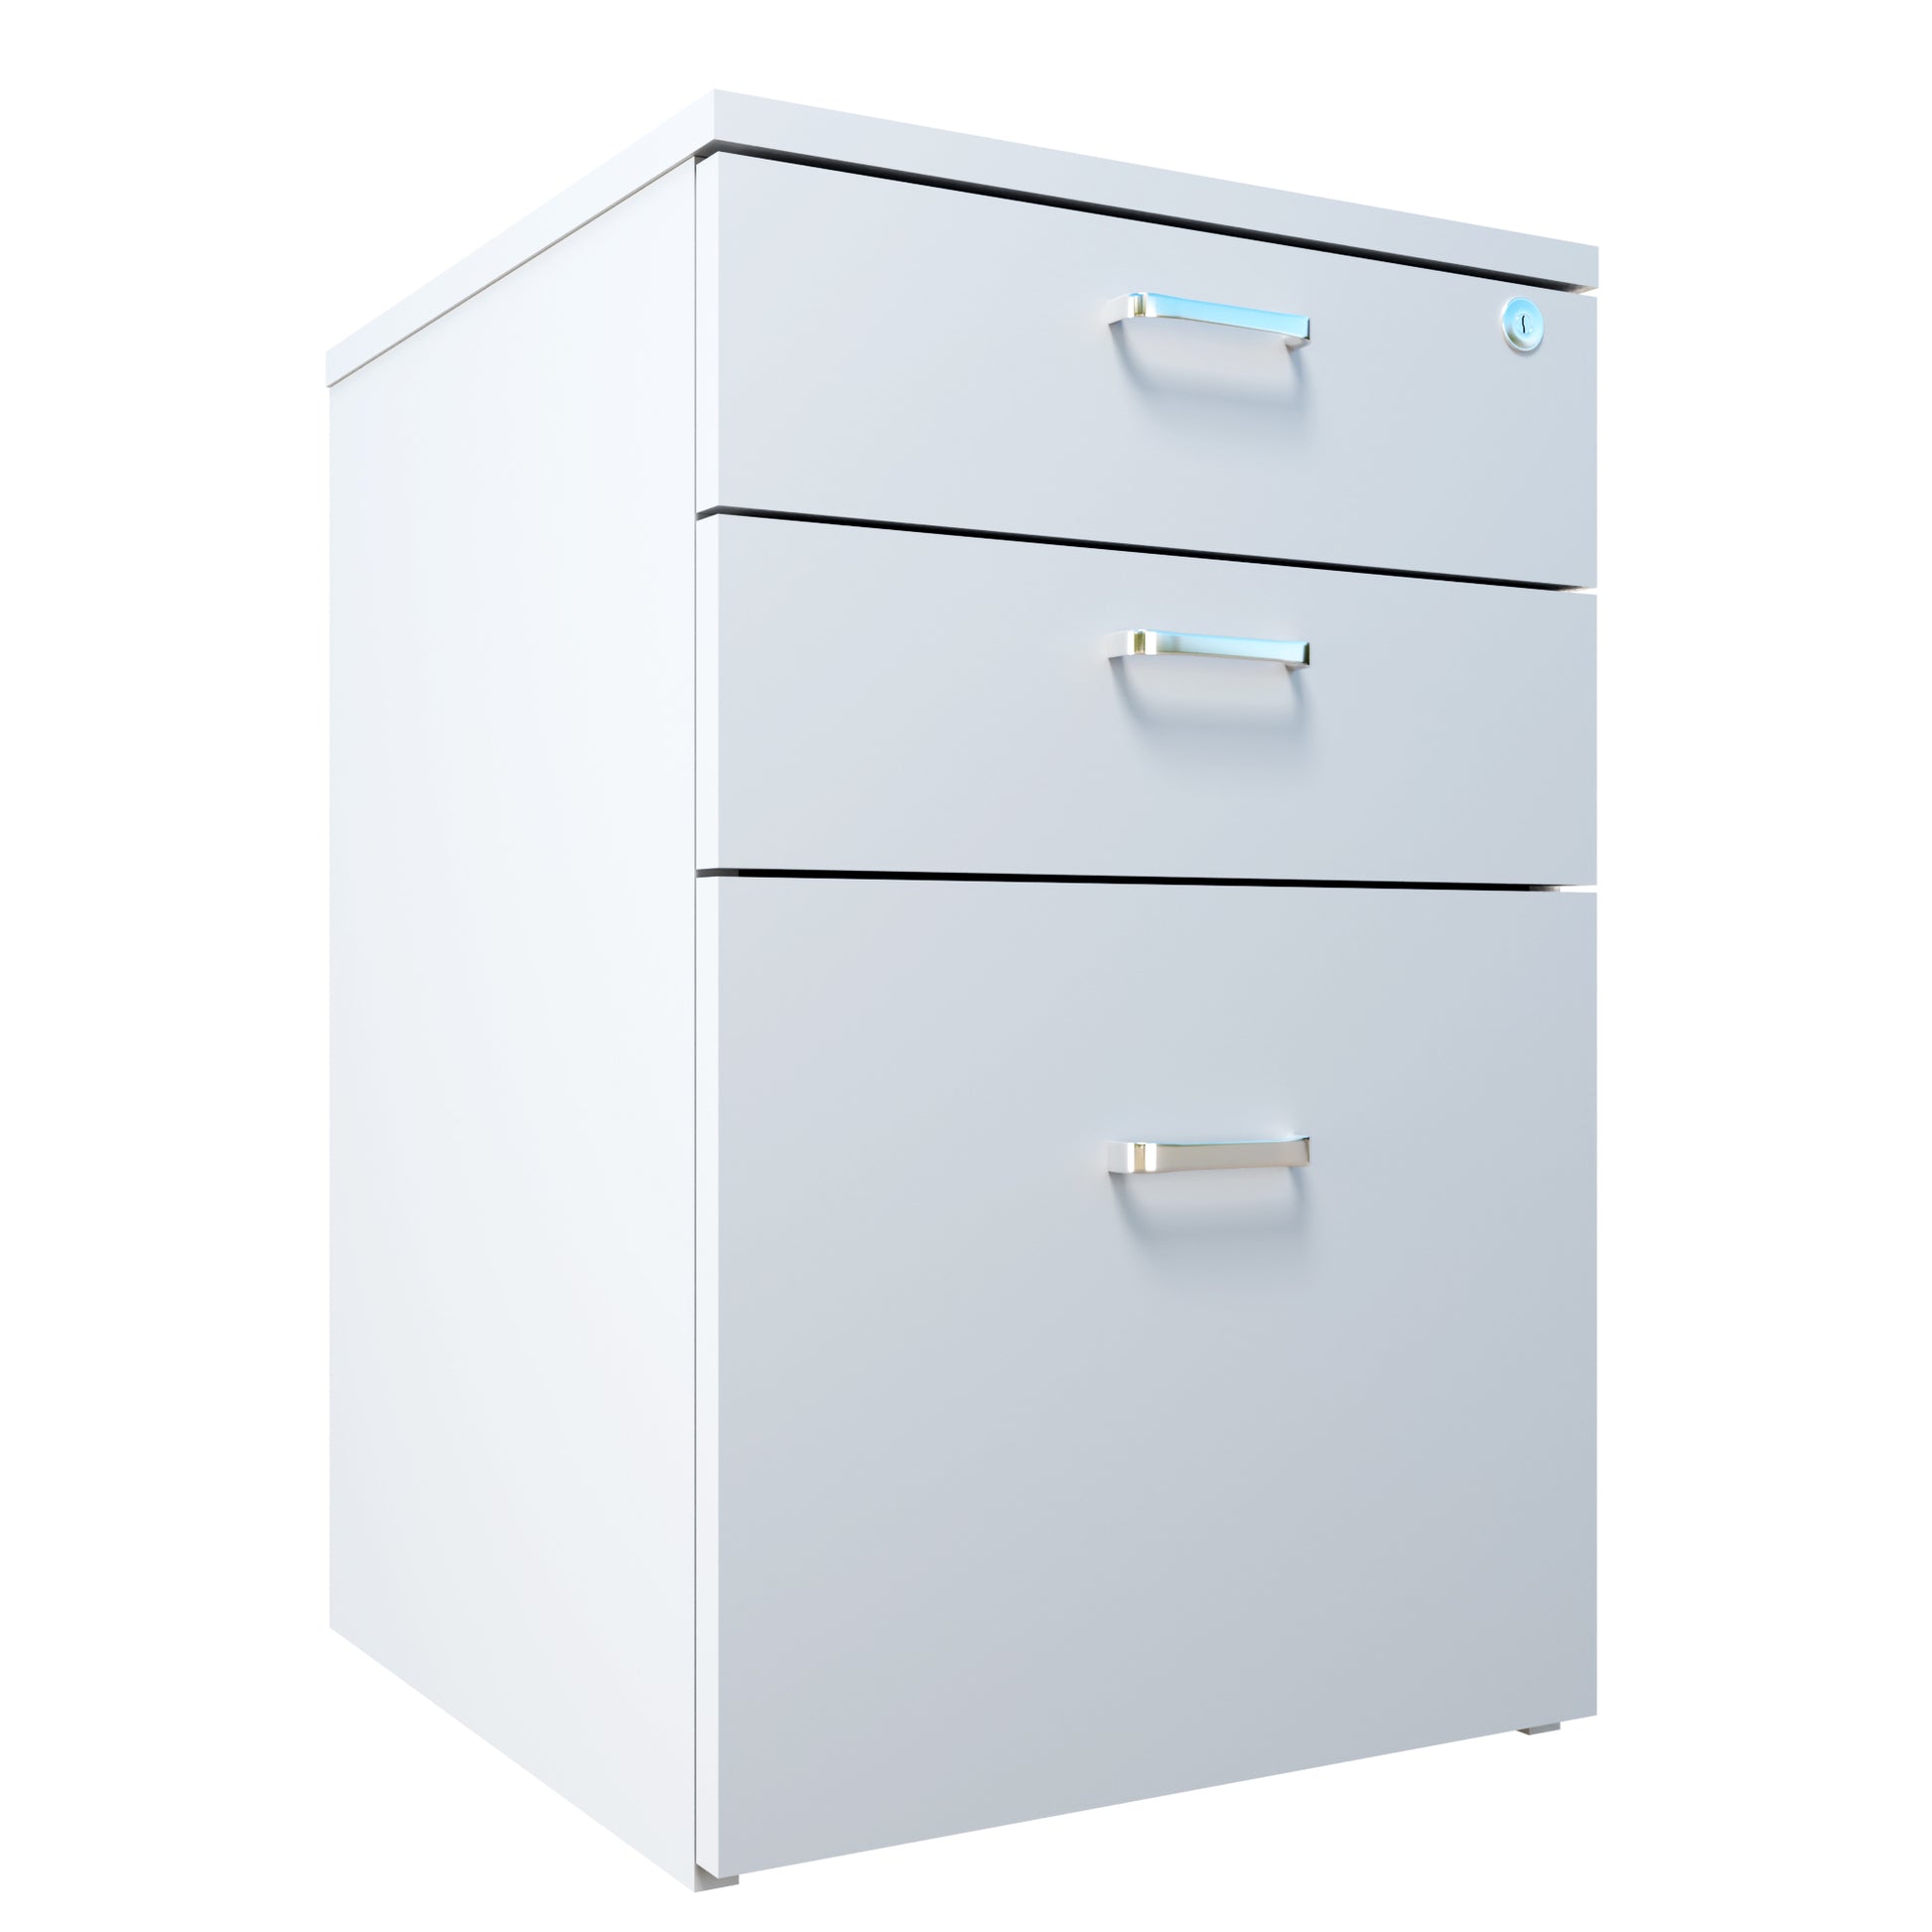 Pedestal 3 Drawer unit with smart lock  (Suede Finish , Frosty white and Wenge ) piedestal Drawer Units VIKI FURNITURE   